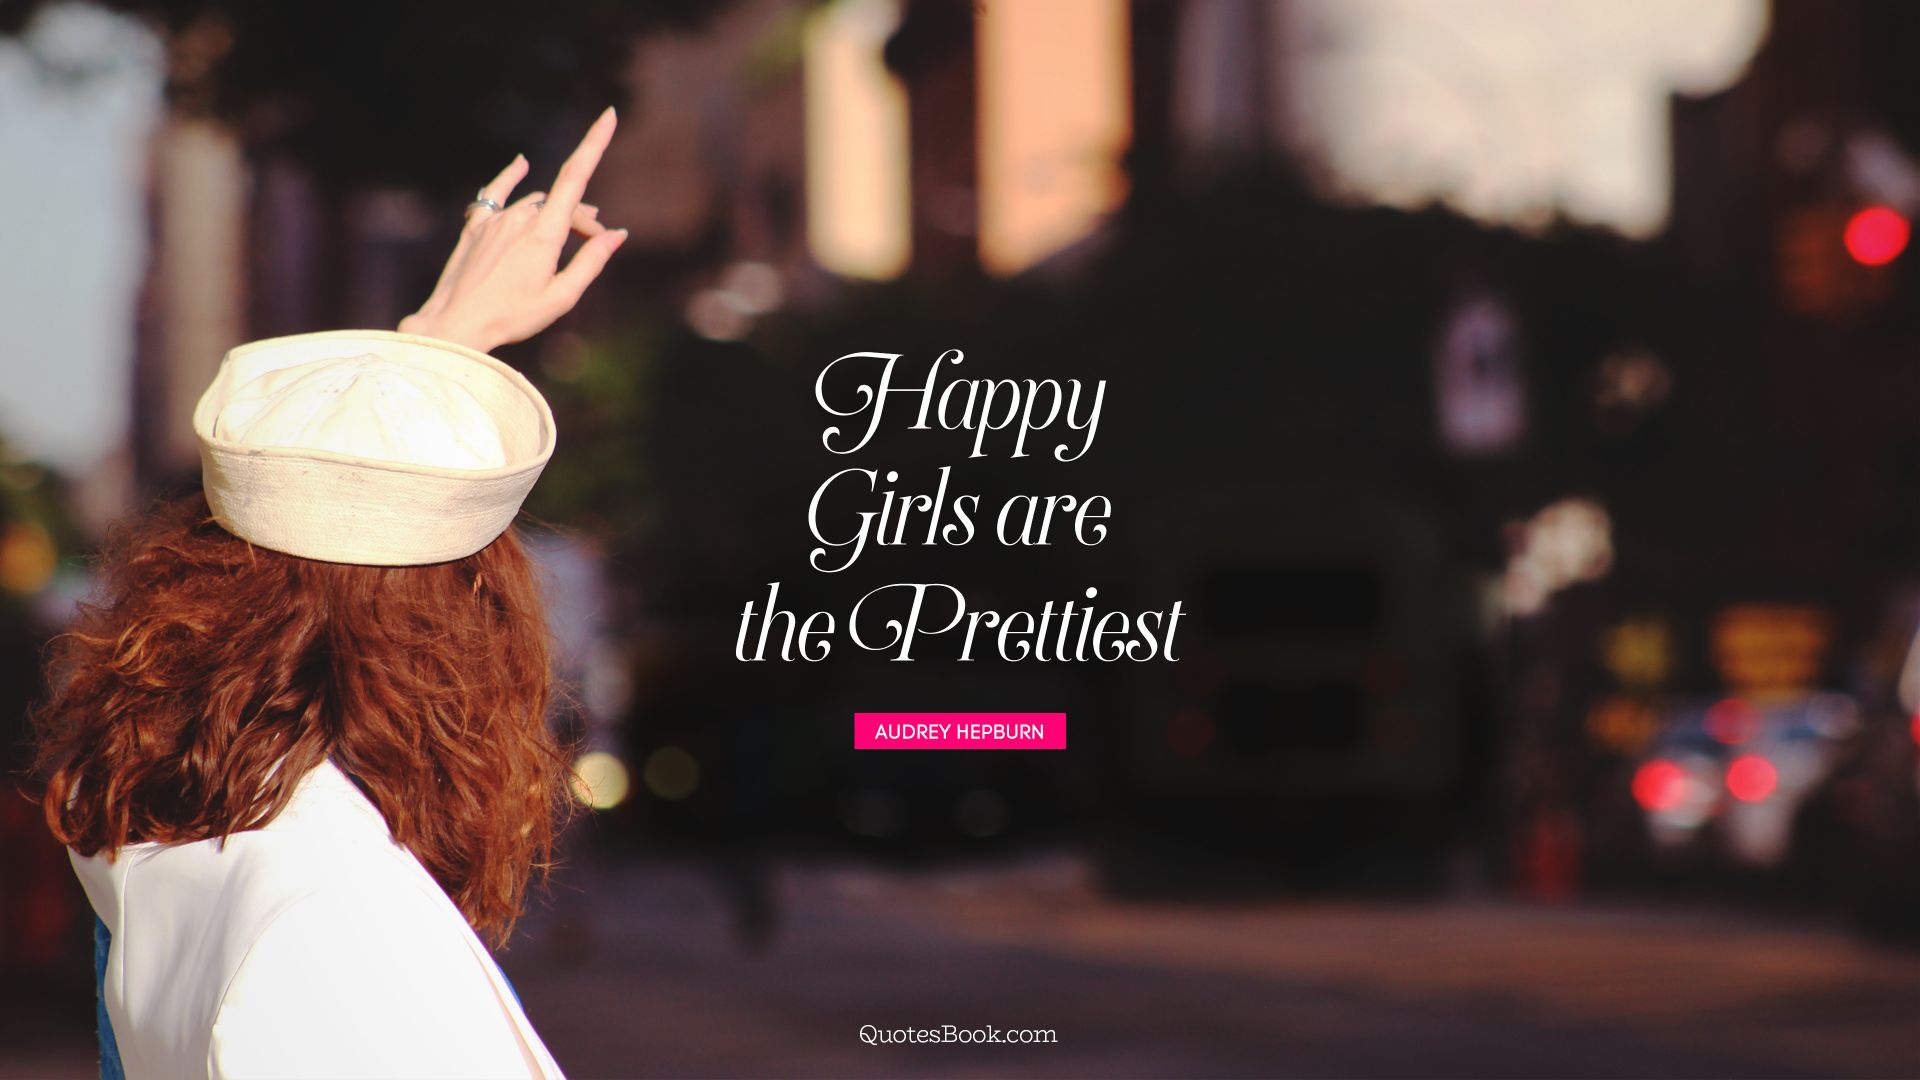 Happy girls are the prettiest. - Quote by Audrey Hepburn